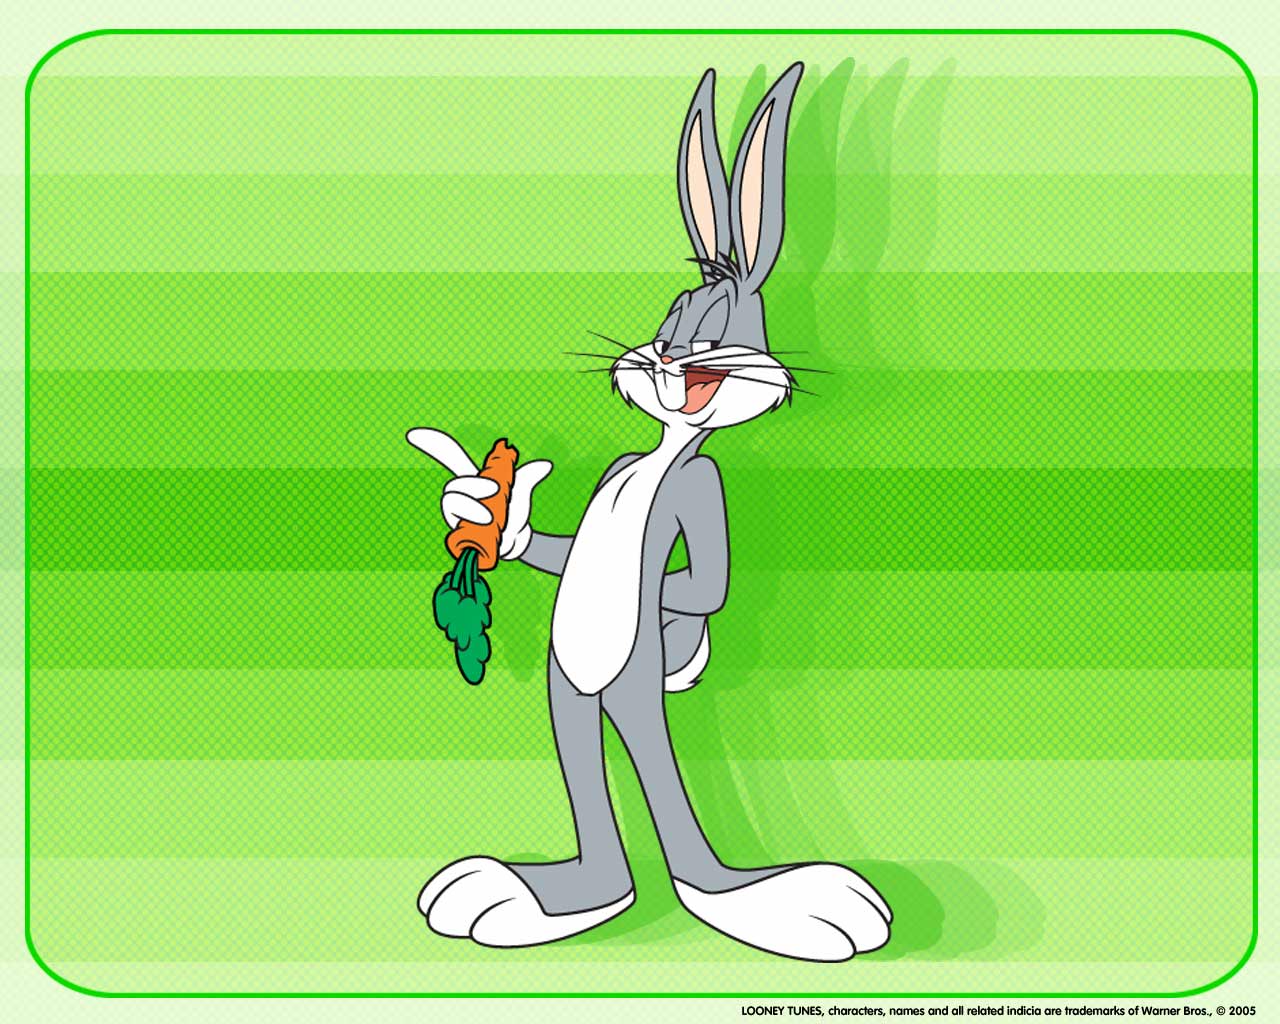 Download Free HD Wallpaper Bugs Bunny Wallpapers Free - Download